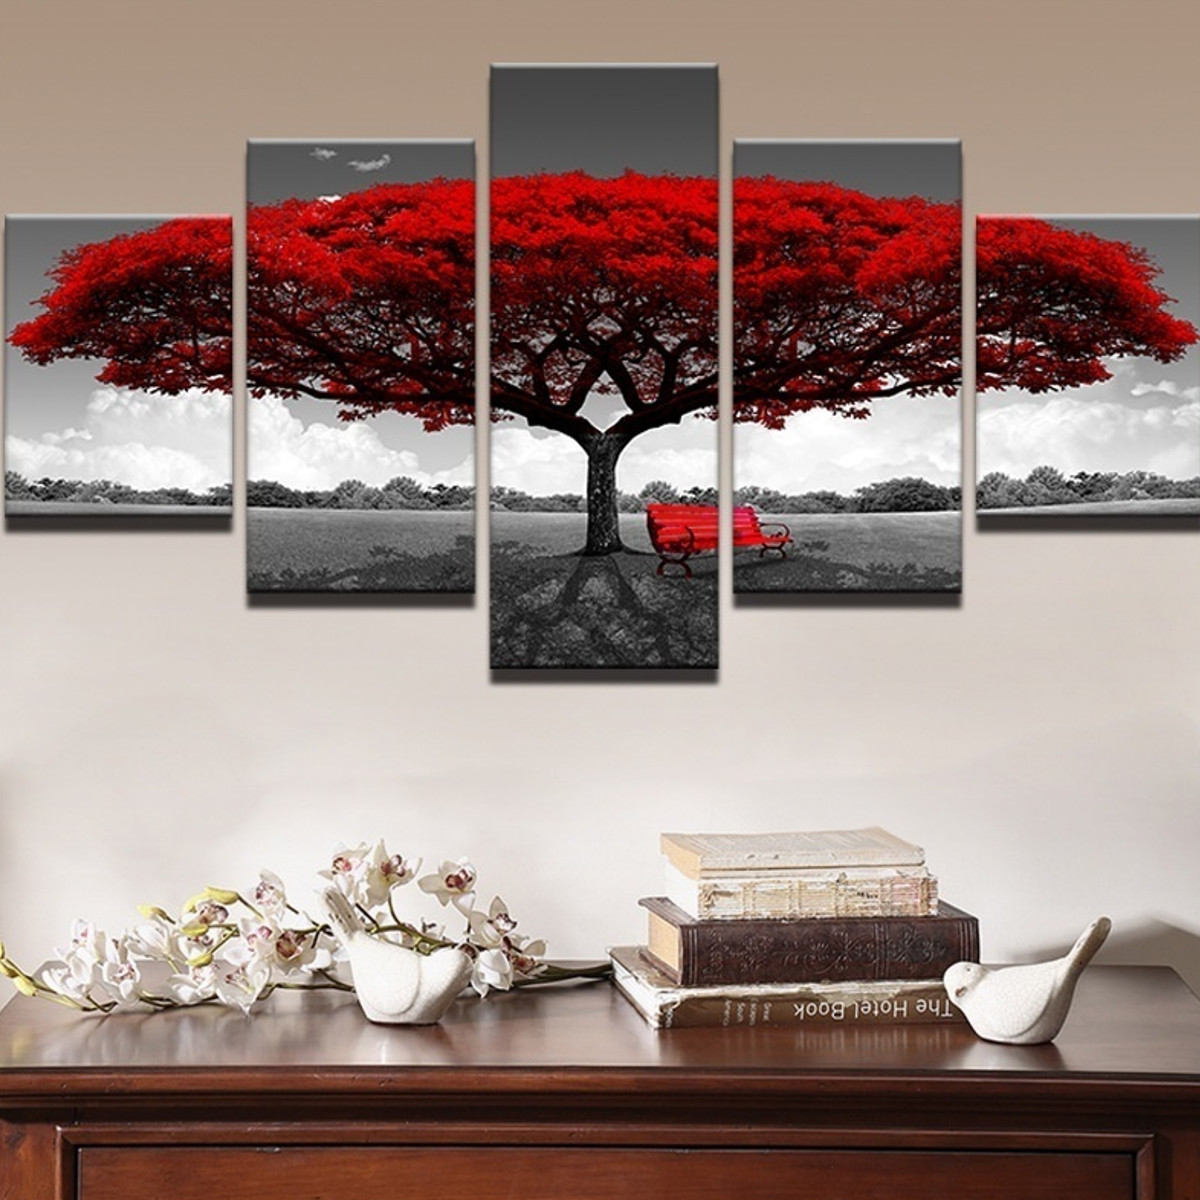 5Pcs-Red-Tree-Canvas-Paintings-Wall-Decorative-Print-Art-Pictures-Unframed-Wall-Hanging-Home-Office--1774551-6